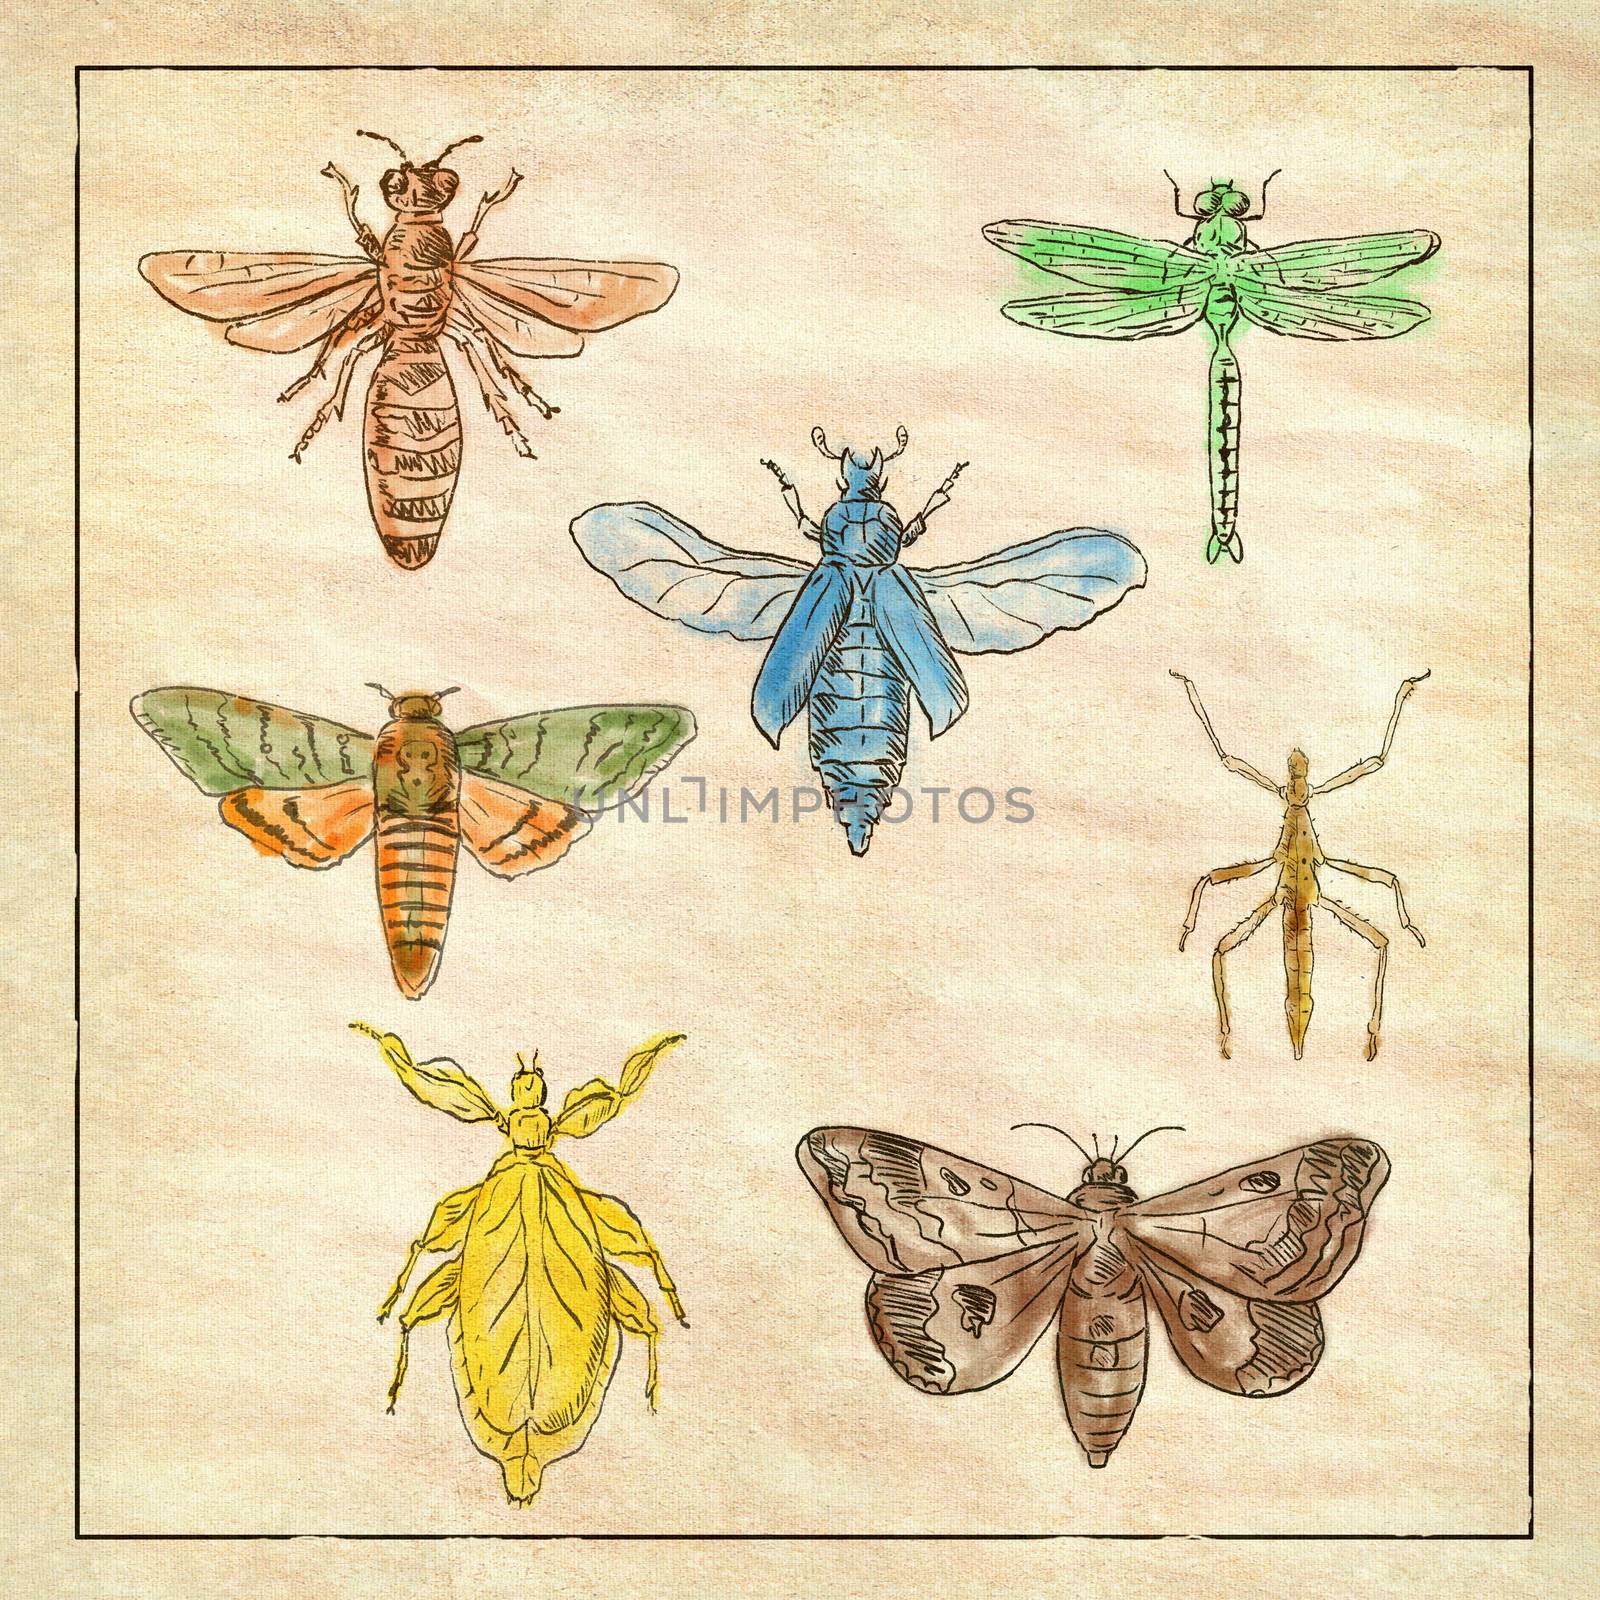 Vintage Victorian drawing illustration of a collection of insects like the Moth, Dragonfly, Mantis and Stick Insect in full color on antique paper.